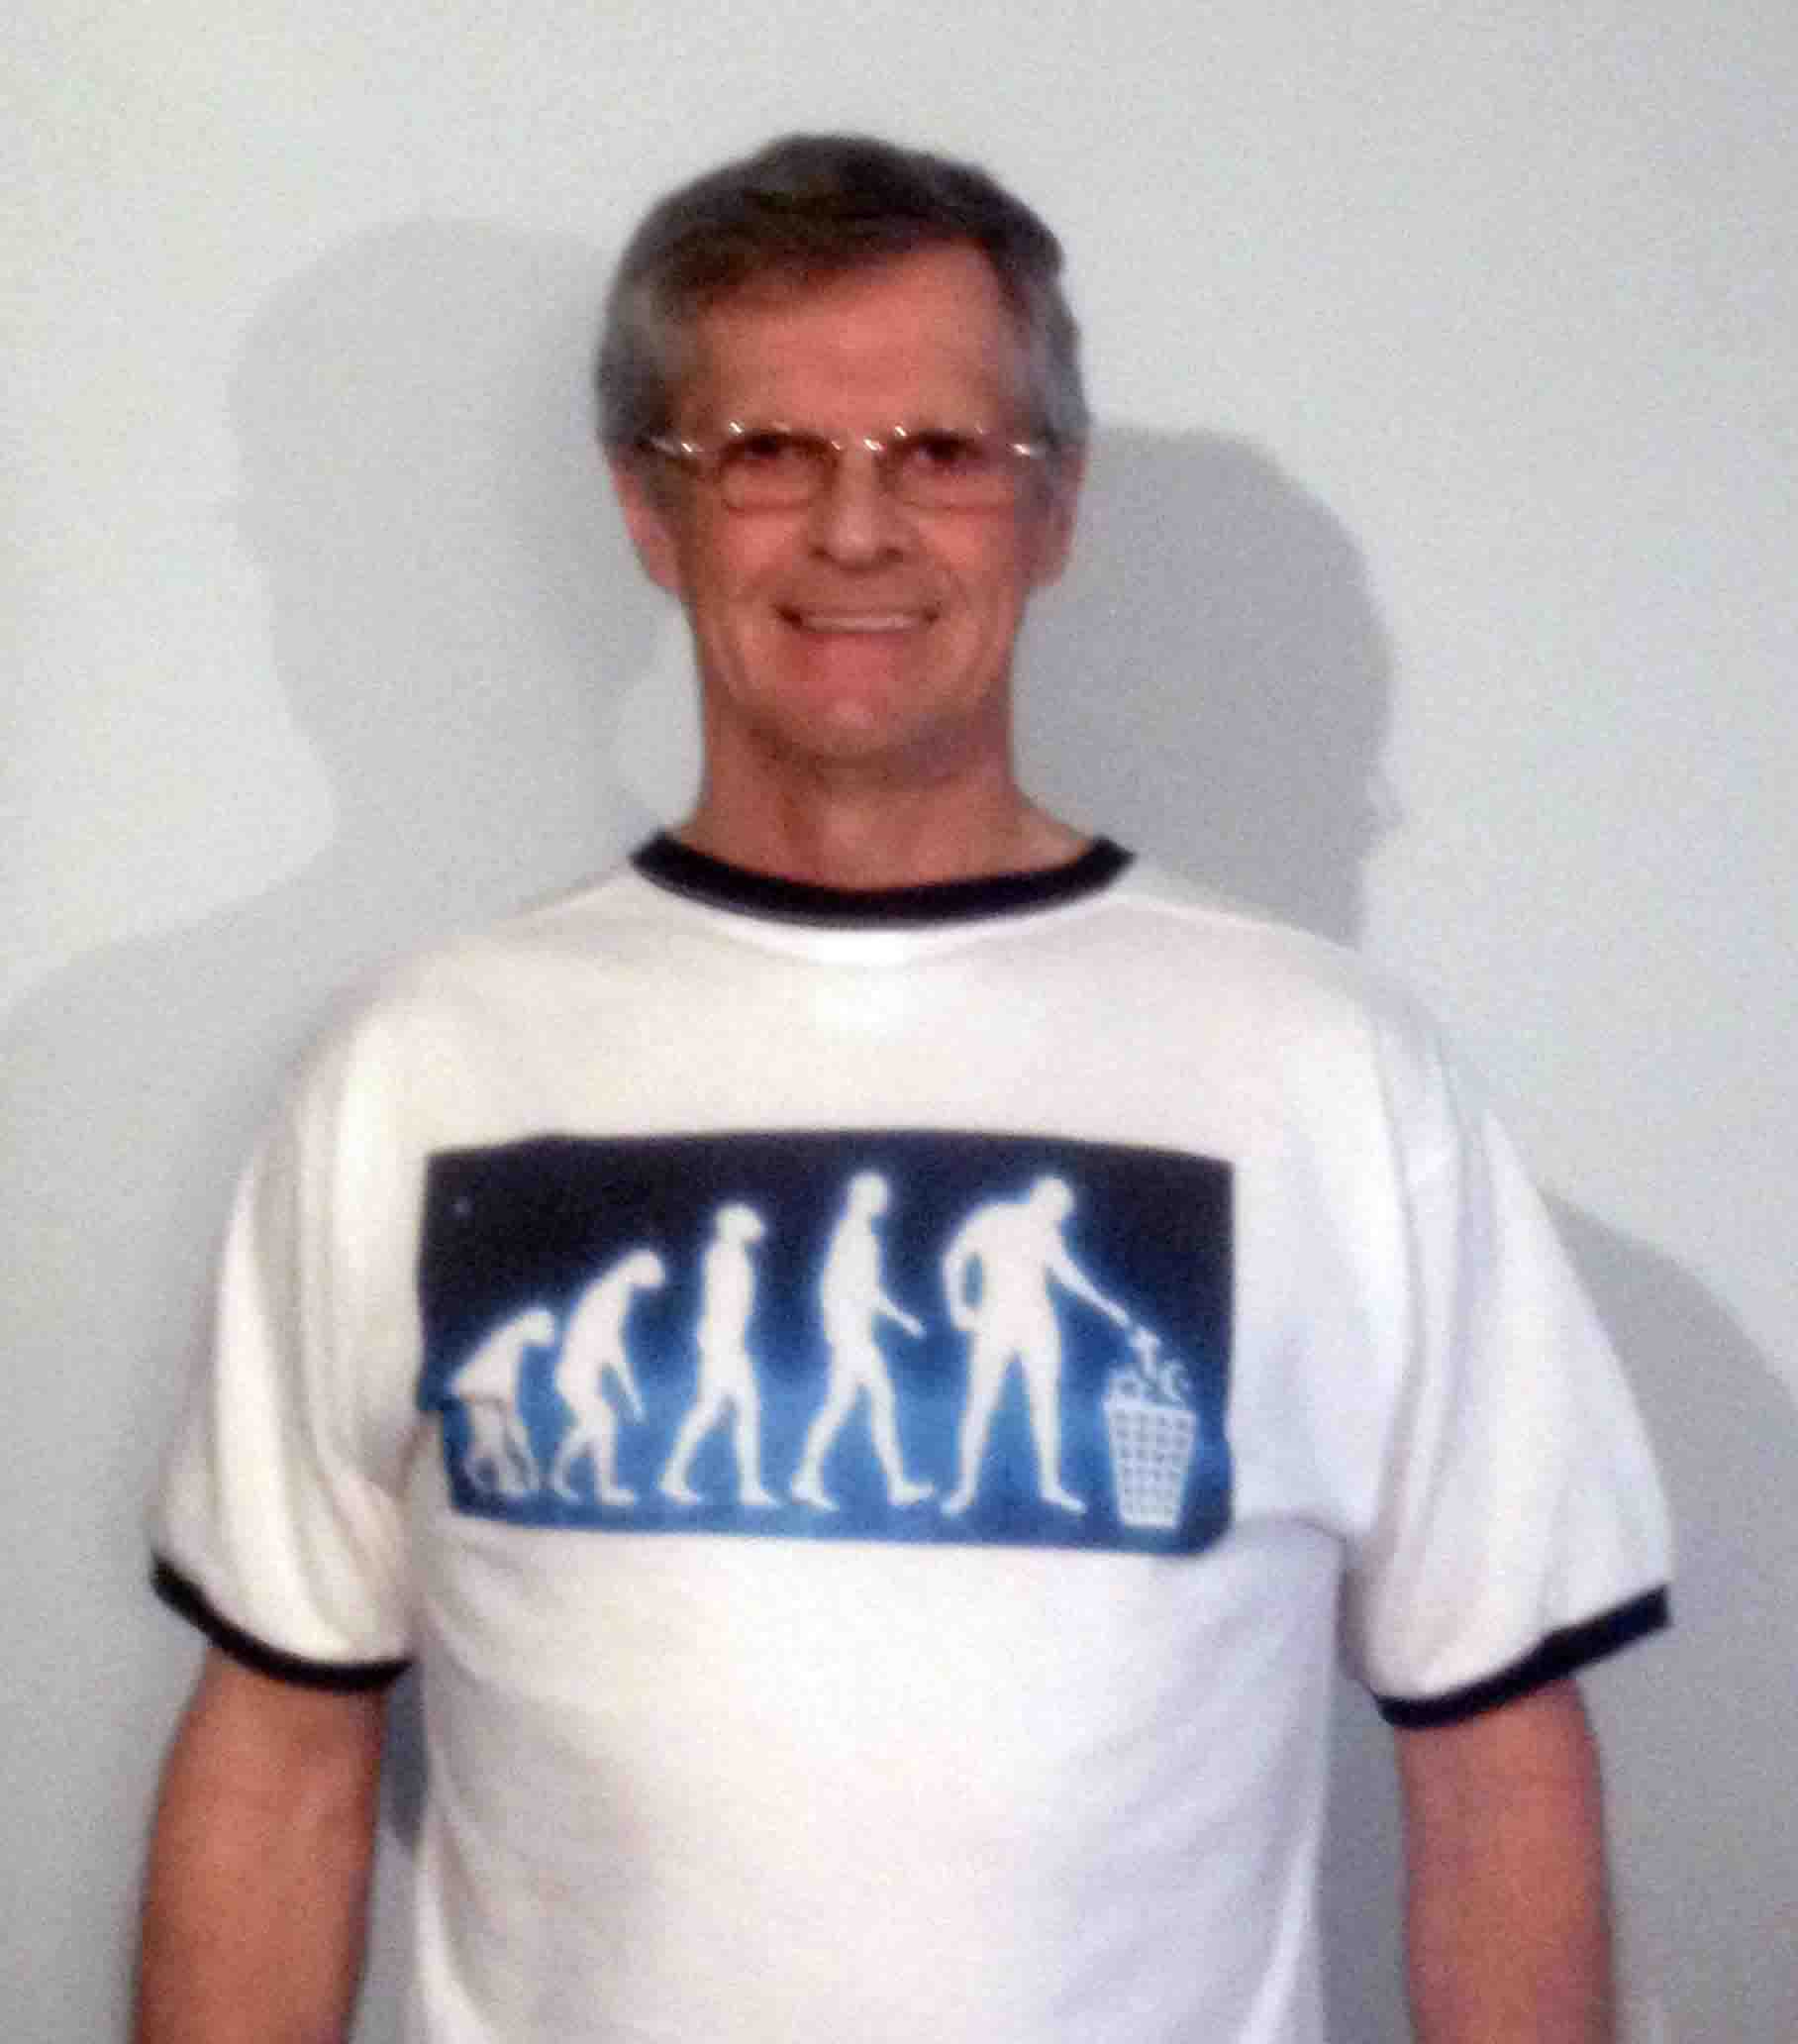 Darwin Bedford wearing his shirt that shows man evolving to the point of trashing religion